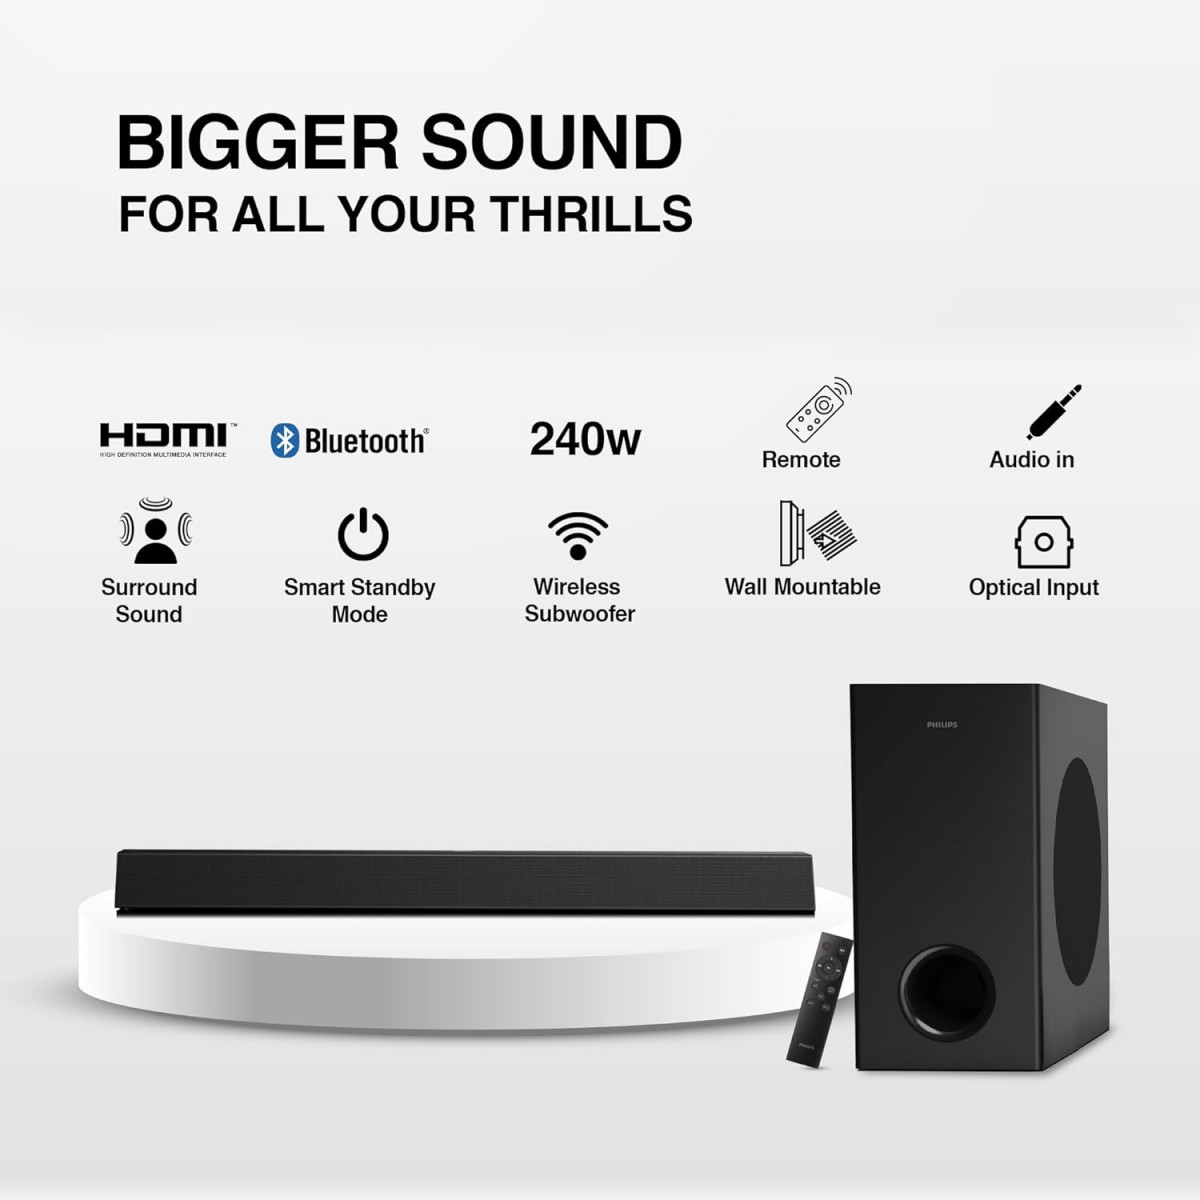 Philips TAB7007 21 CH 240W Dolby Digital Plus Bluetooth Soundbar V53 with Wireless subwoofer Multi-Connectivity Option with Supporting USB HDMI AUX  Remote Control Black